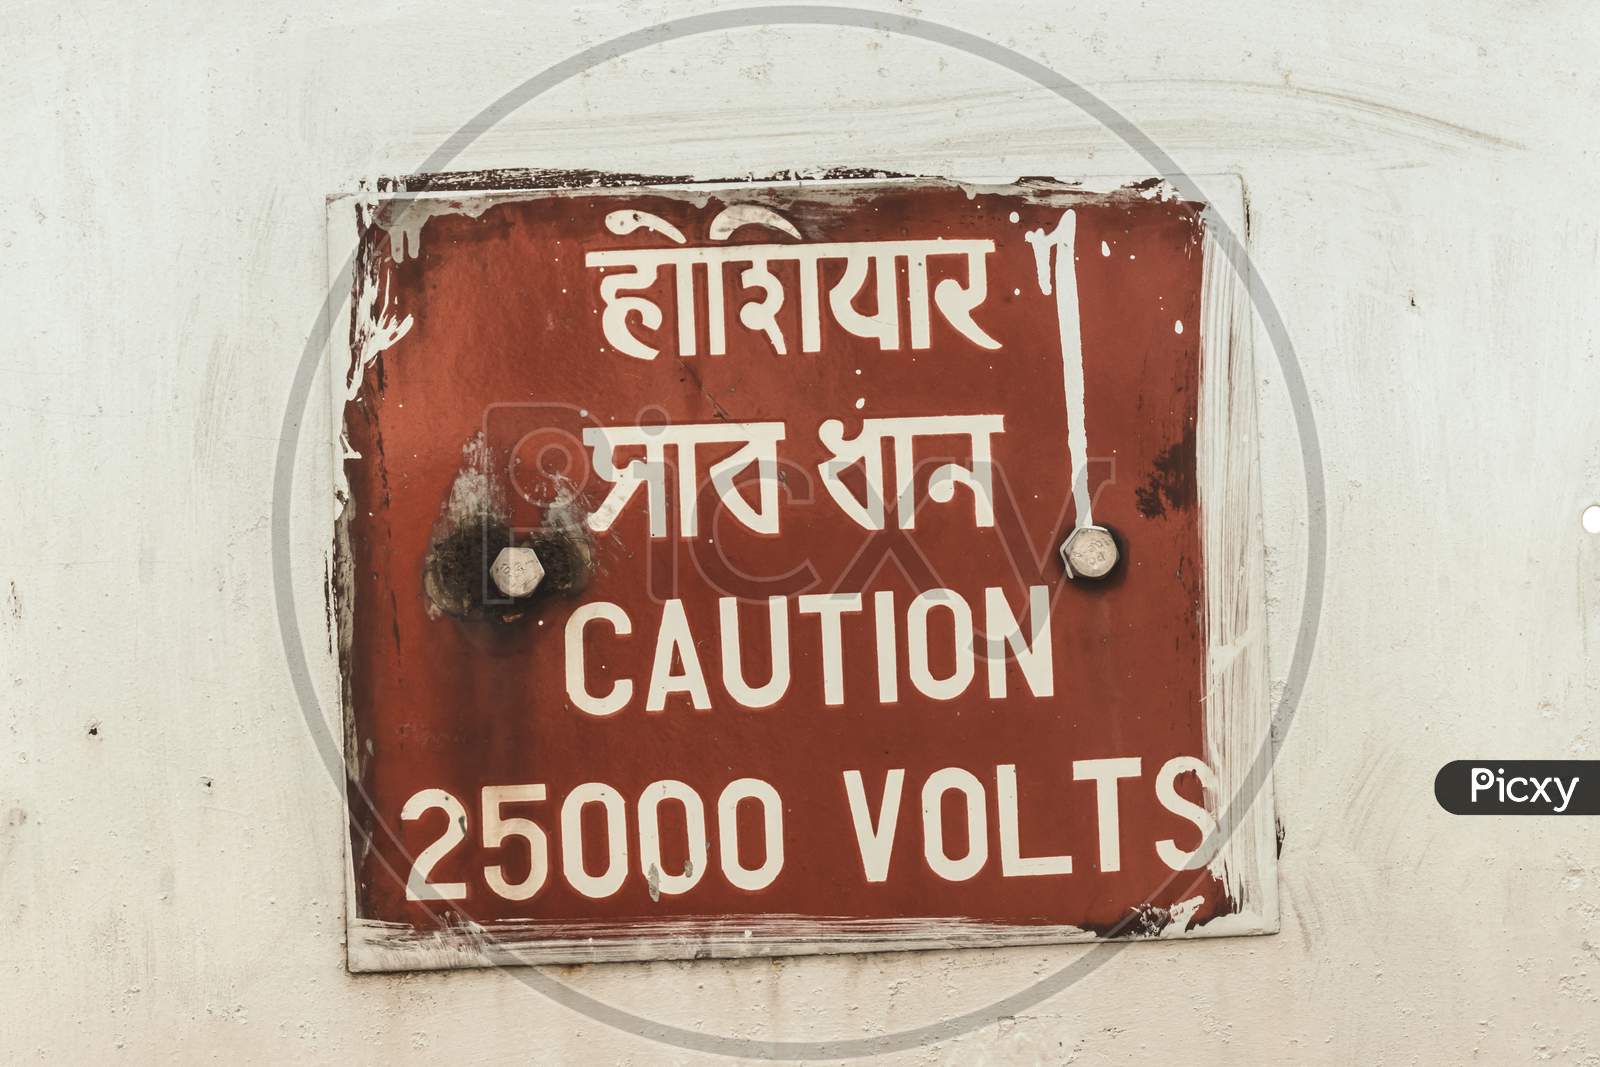 Caution 25000 High Voltage Safety Warning Sign In A Clear And Straight Instructions To Communicate At Work With Everyone For Spreading Awareness About A Potential Risk In Workplace Around The Premises. Written In Hindi And English Language.